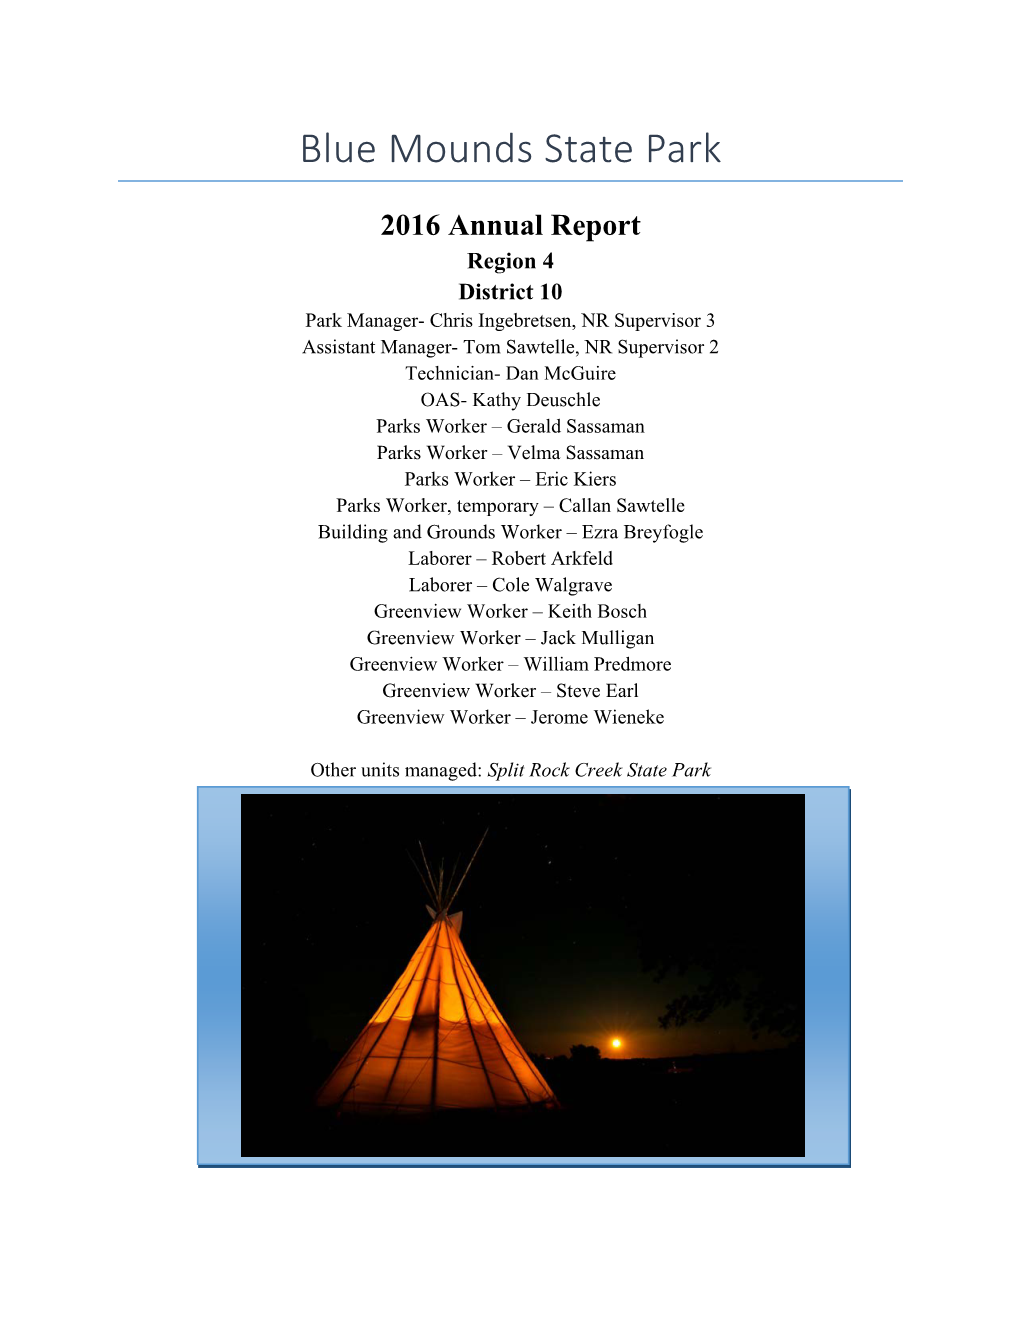 Blue Mounds State Park 2016 Annual Report